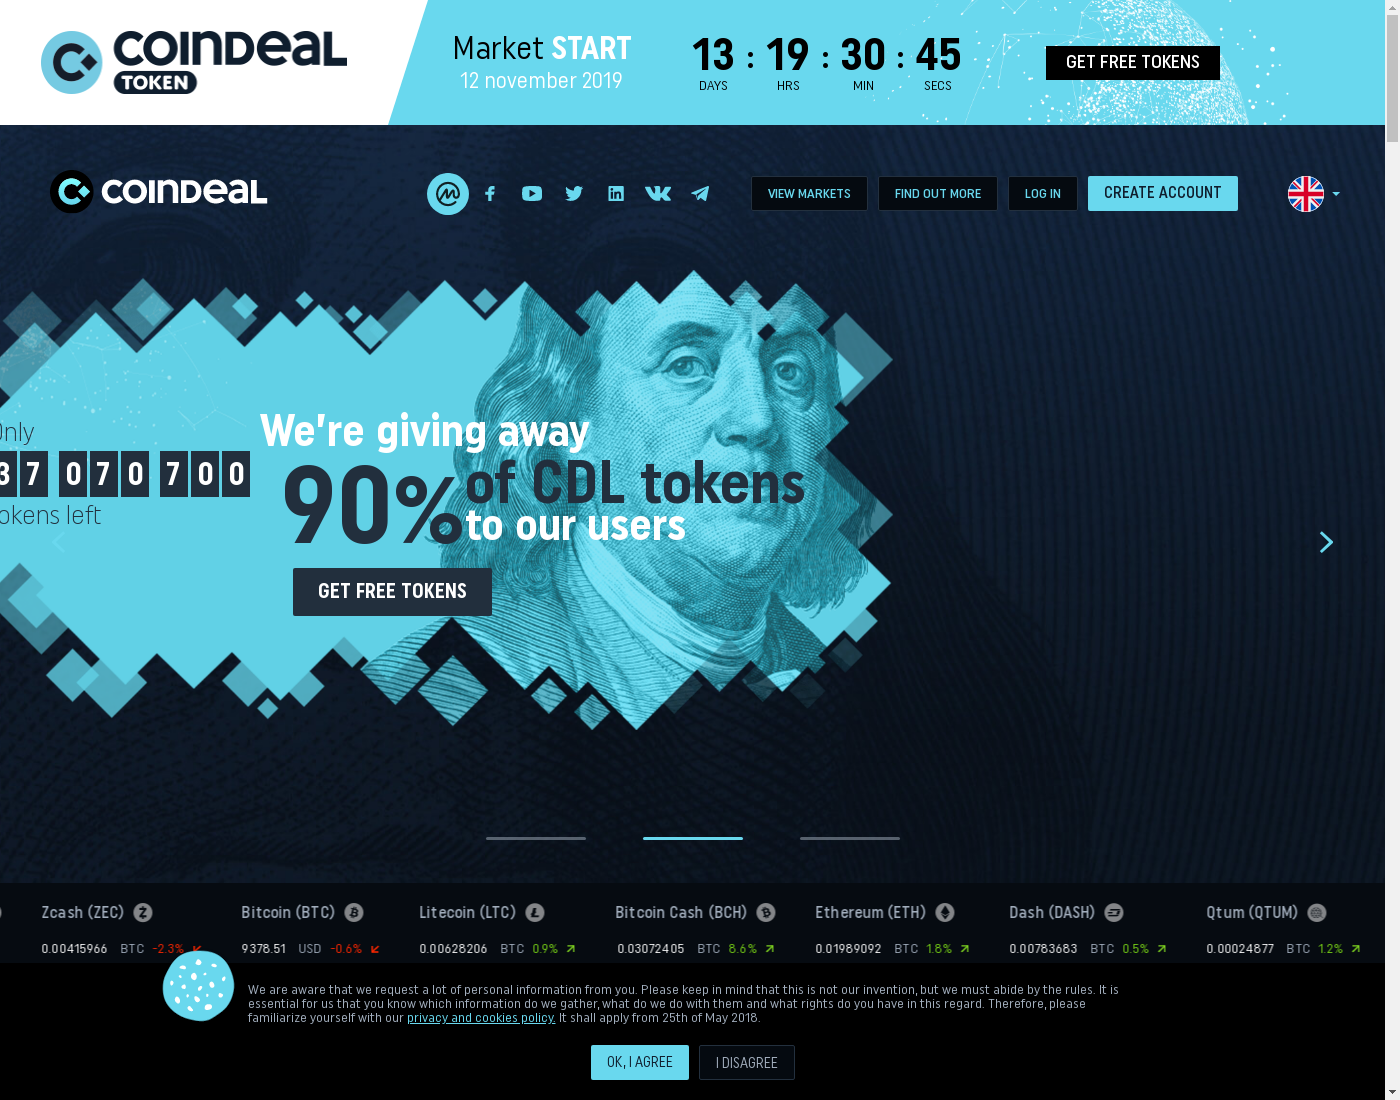 Coindeal user interface: the home page in English